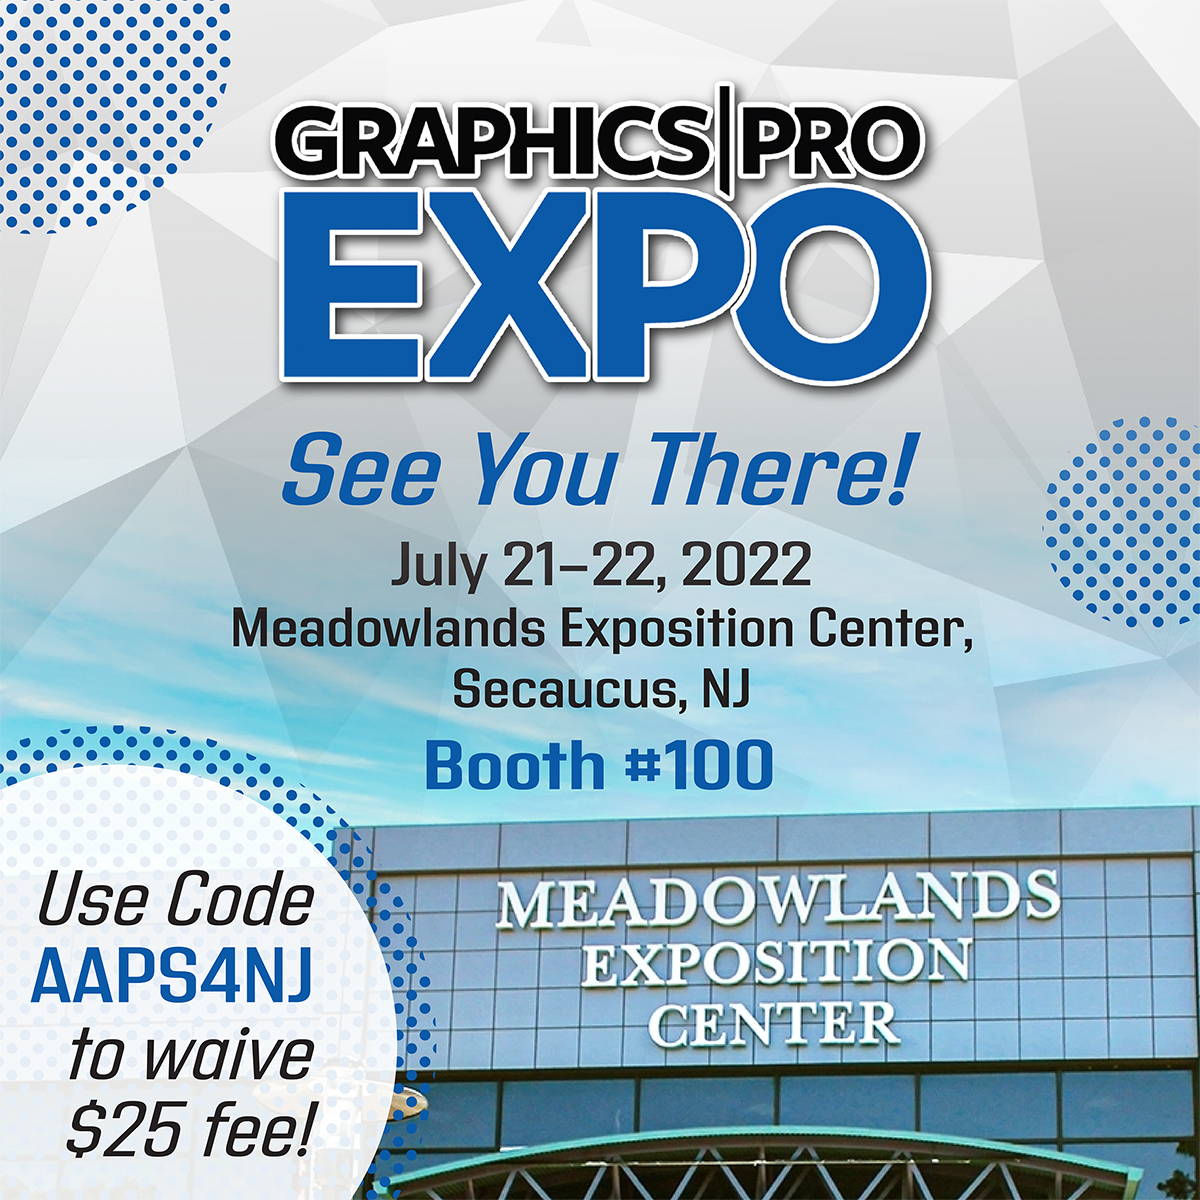 All American Print Supply Co. at Graphics Pro Expo July 21-22, 2022 Meadowlands Exposition Center, Secaucus, NJ Booth #100. Use code AAPS4NJ to waive the $25 fee! See You There! Exhibiting DTF printers, DTG printers, and all your garment printing supplies!